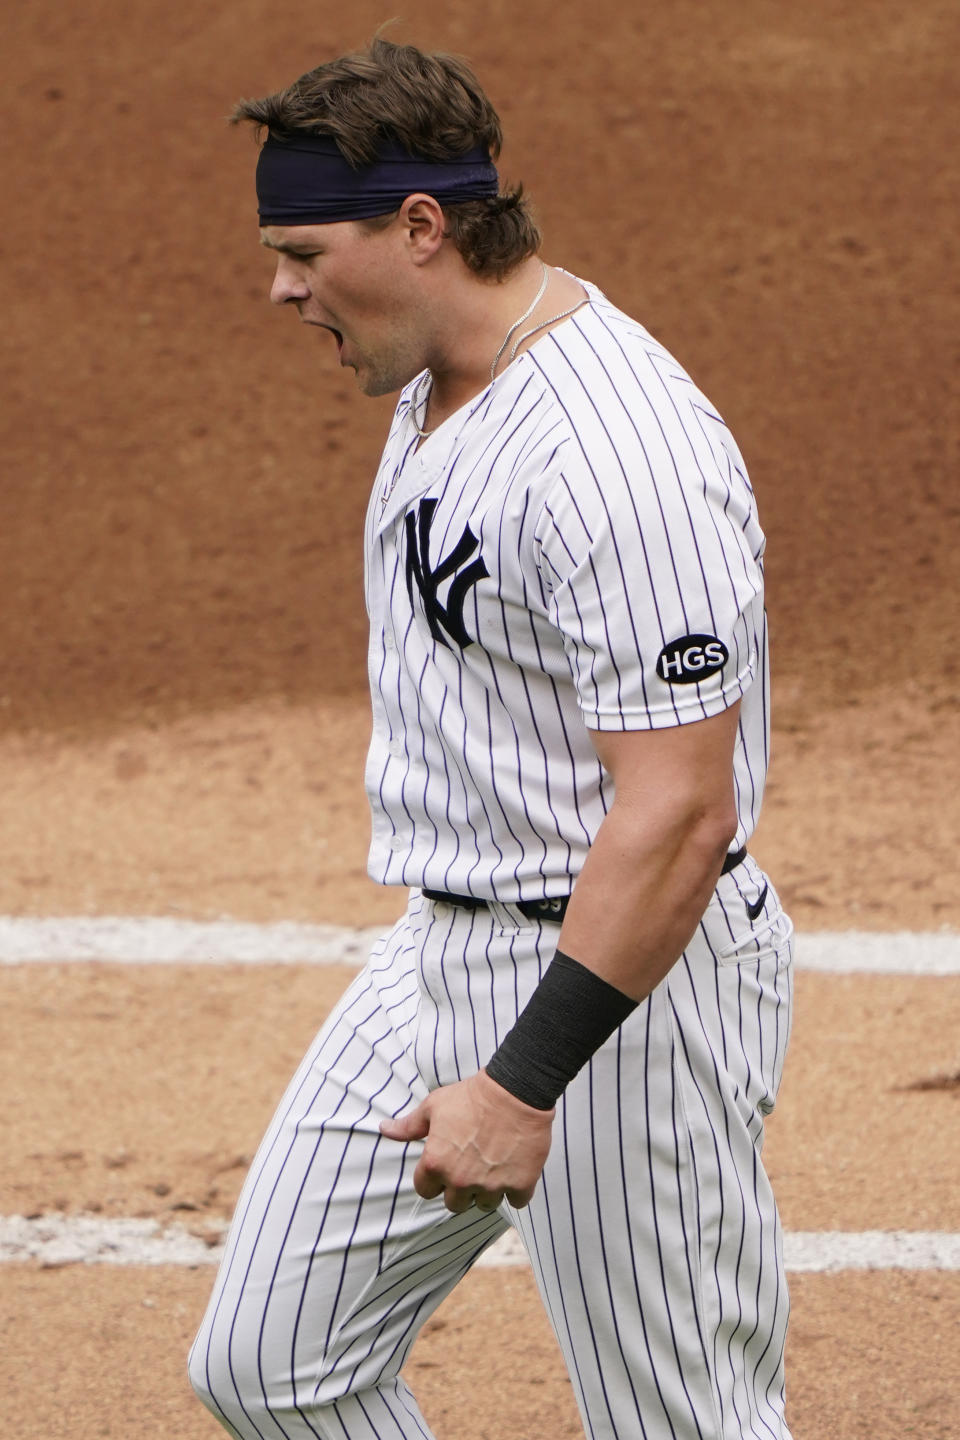 New York Yankees' Luke Voit reacts after flying out during the third inning of a baseball game against the Baltimore Orioles, Sunday, Sept. 13, 2020, at Yankee Stadium in New York. (AP Photo/Kathy Willens)